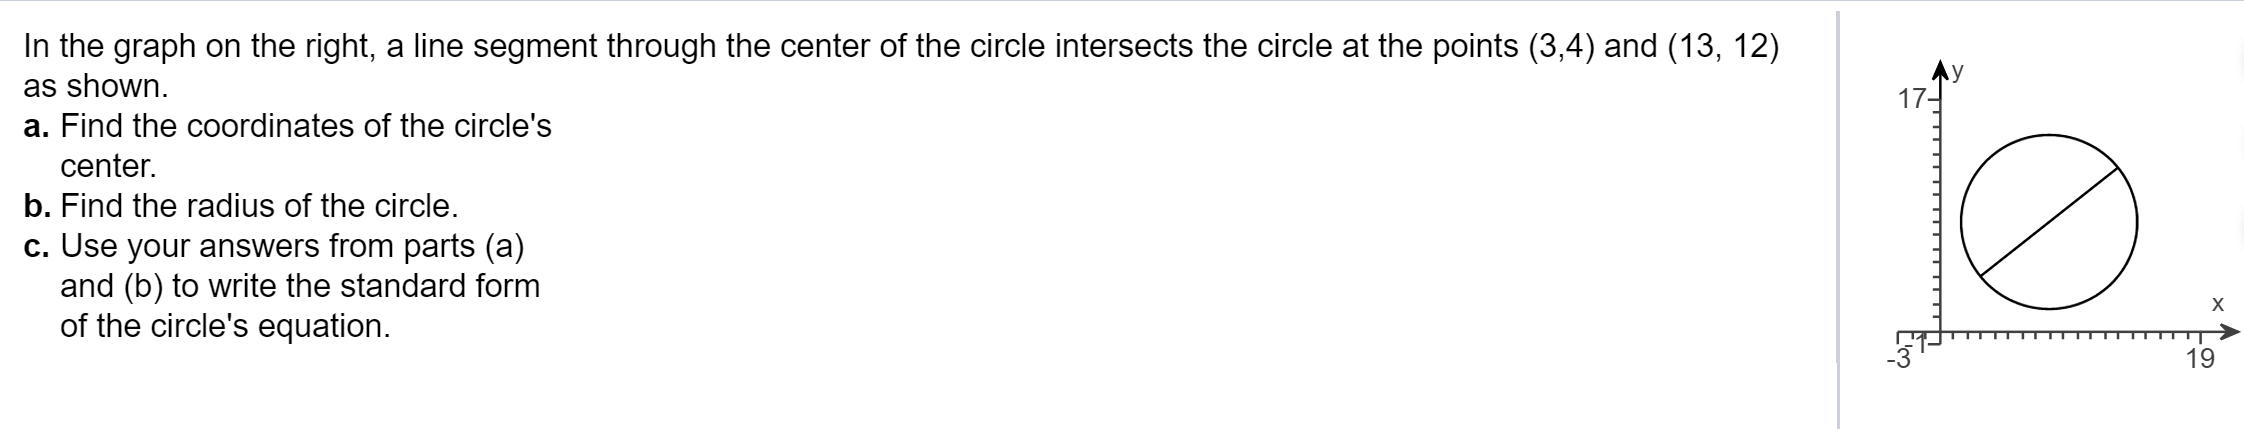 In the graph on the right, a line segment through the center of the circle intersects the circle at the points (3,4) and (13, 12)
as shown.
17-
a. Find the coordinates of the circle's
center.
b. Find the radius of the circle.
c. Use your answers from parts (a)
and (b) to write the standard form
of the circle's equation.
х
19
